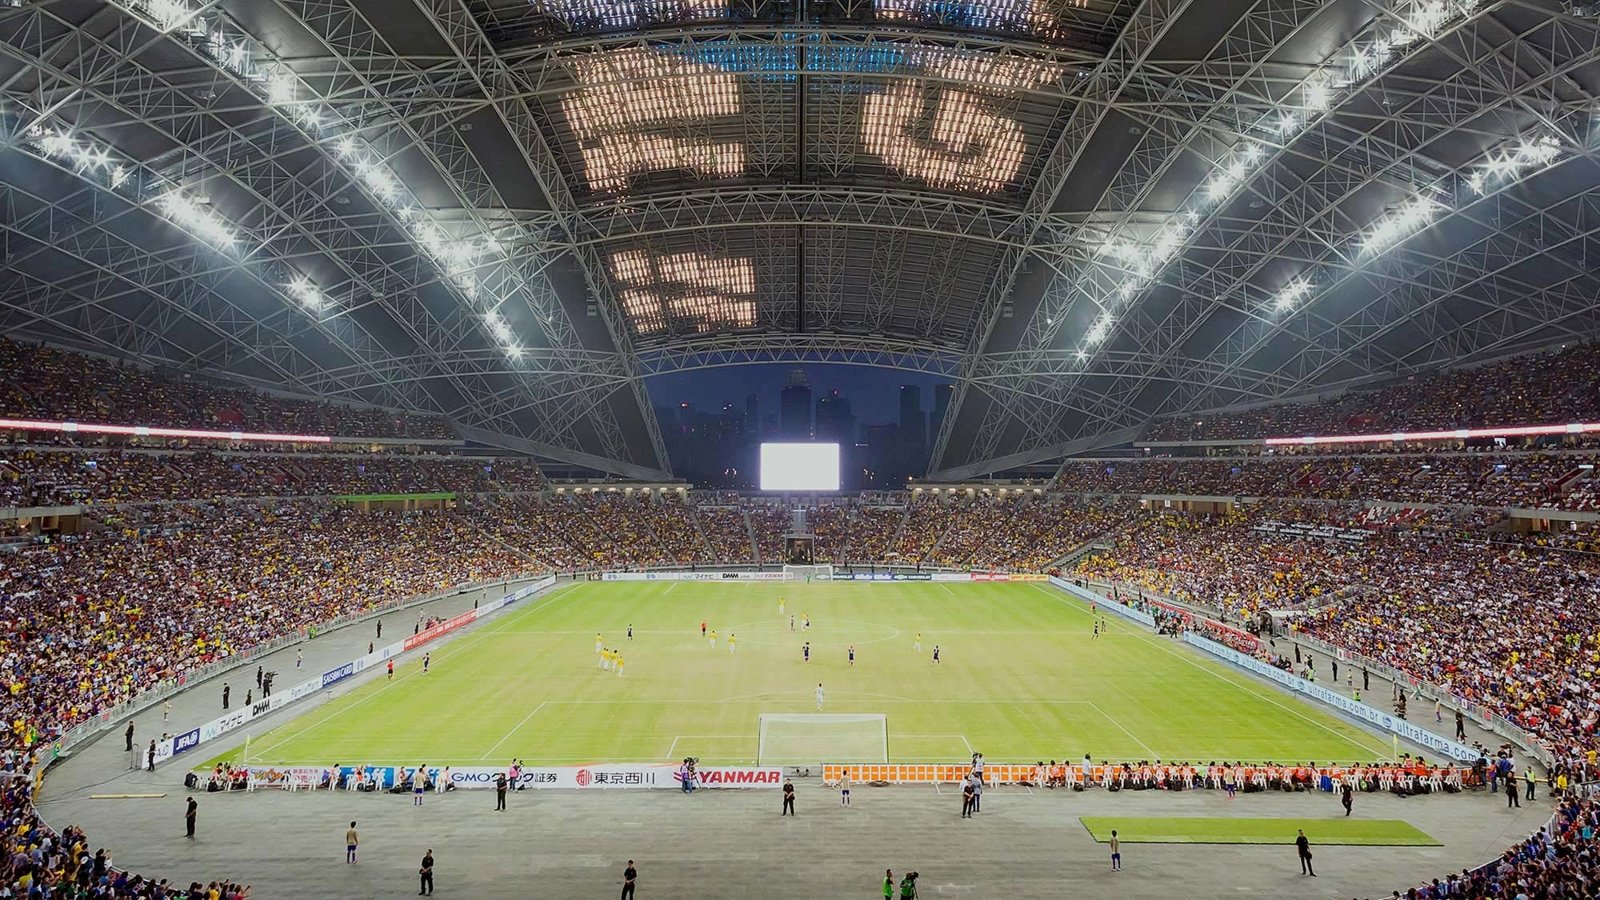 Singapore Stadium hosting football with the roof open